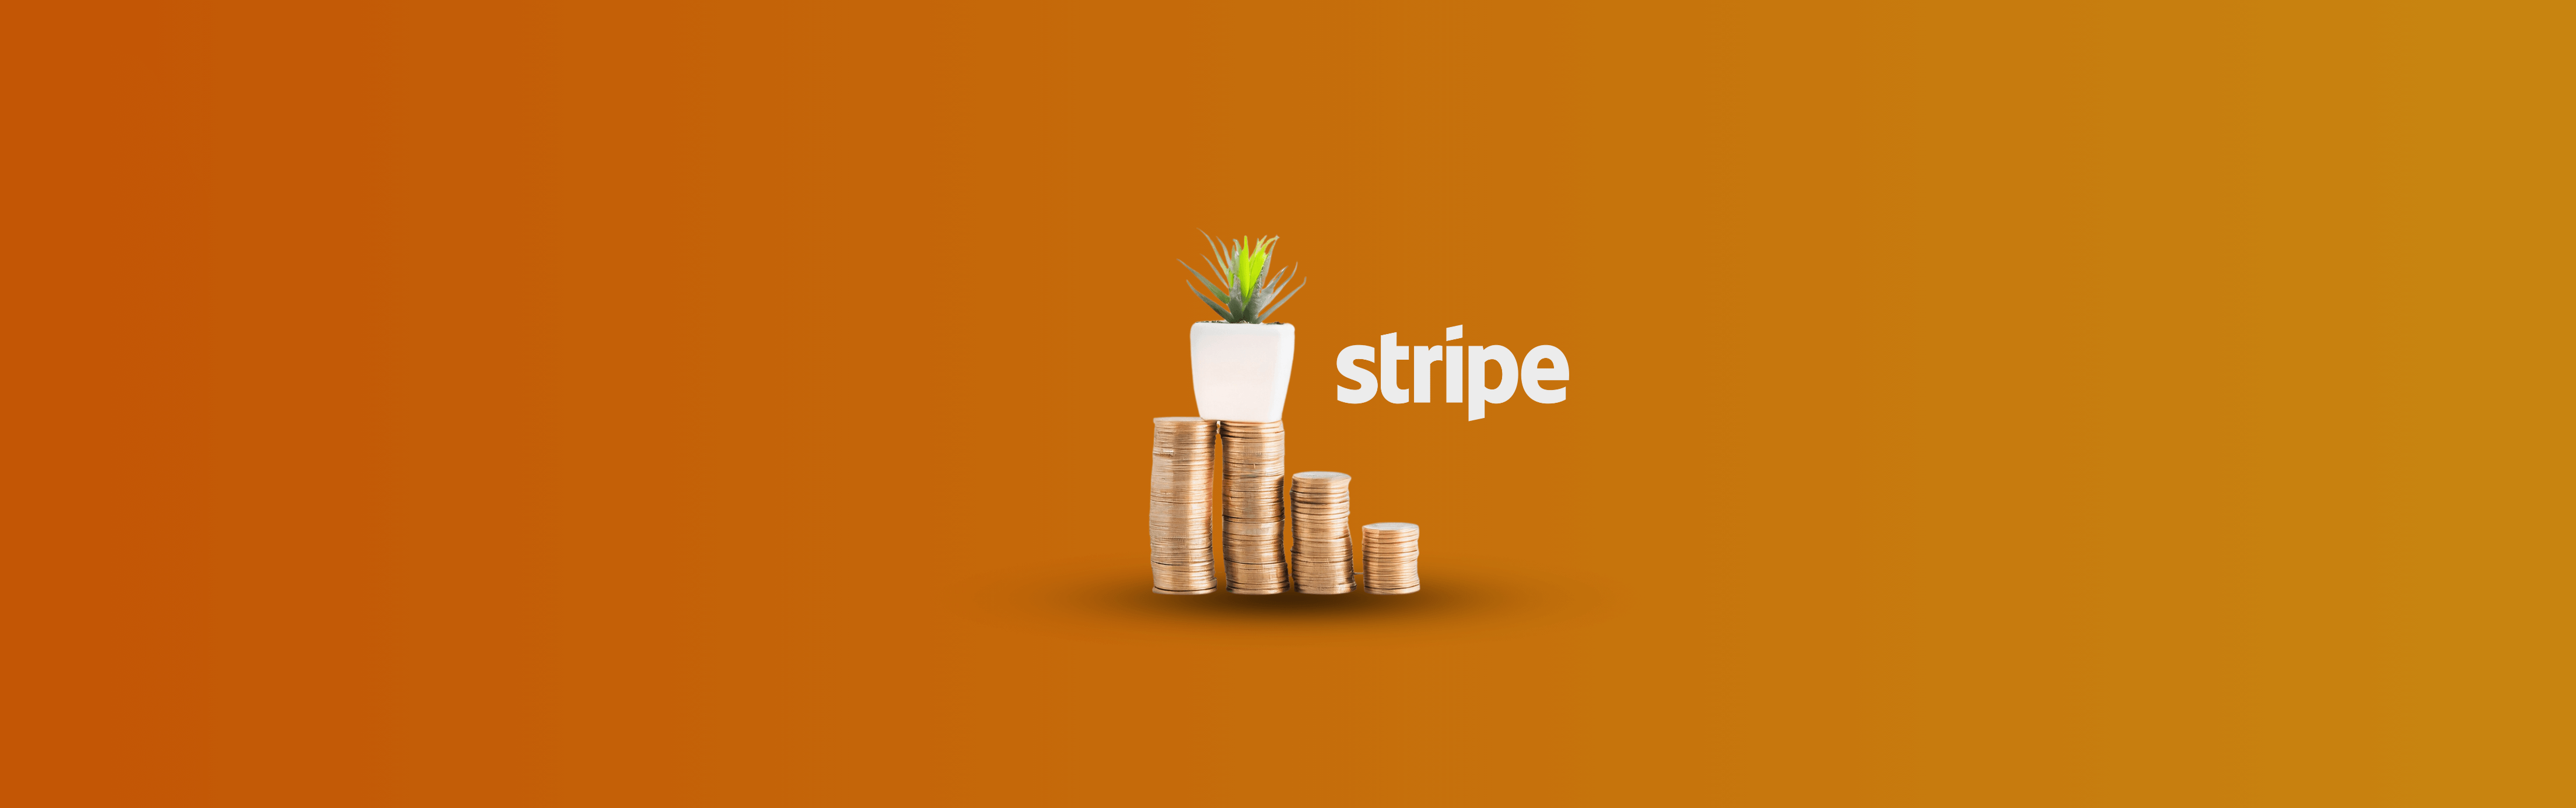 Stripe Tax: Understanding How to Apply Taxes on Stripe